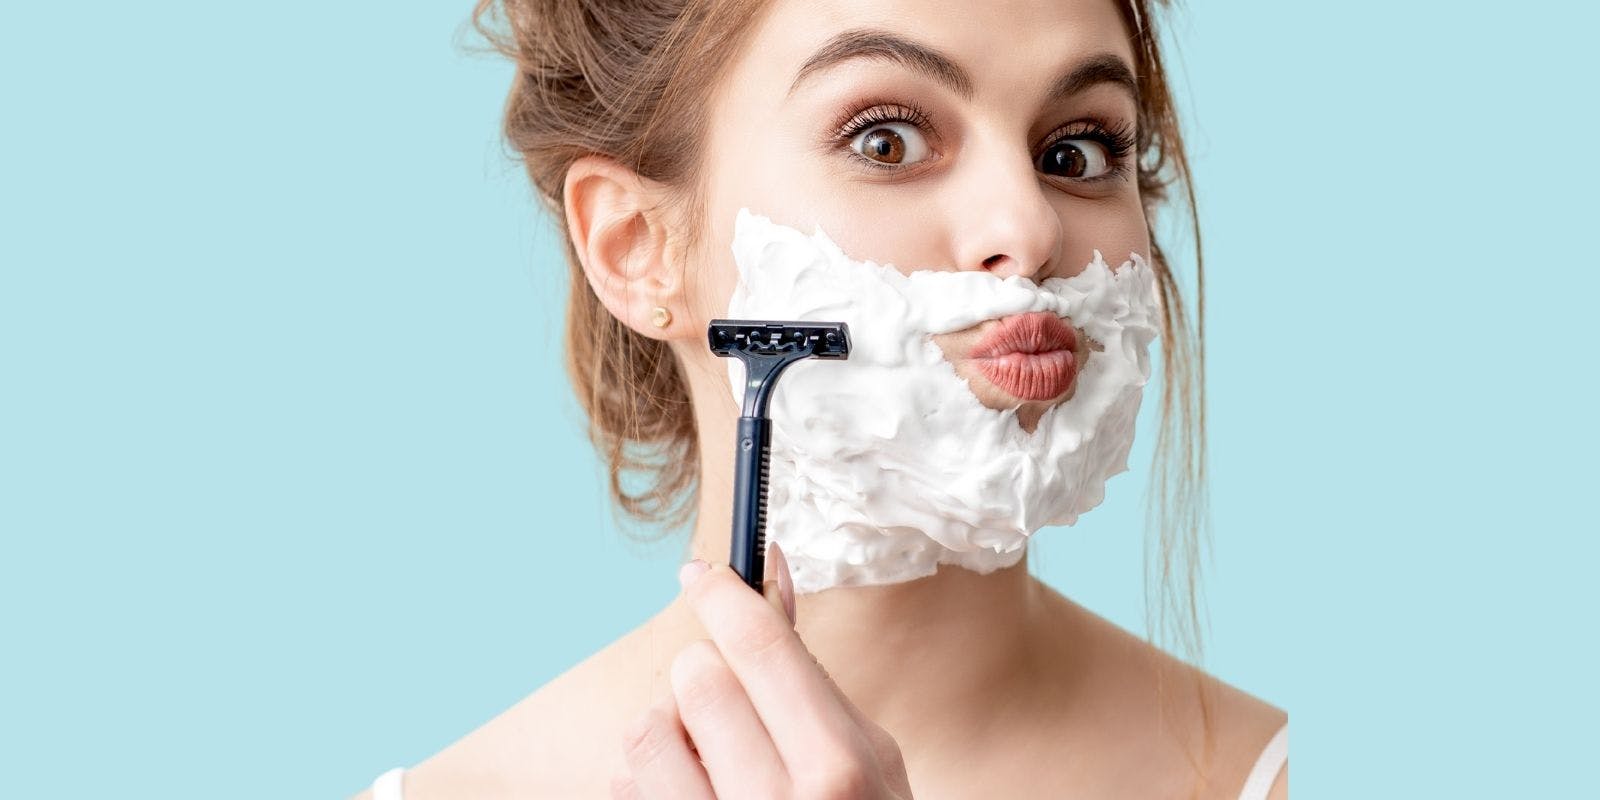 Face Shaving For Ladies With PCOS